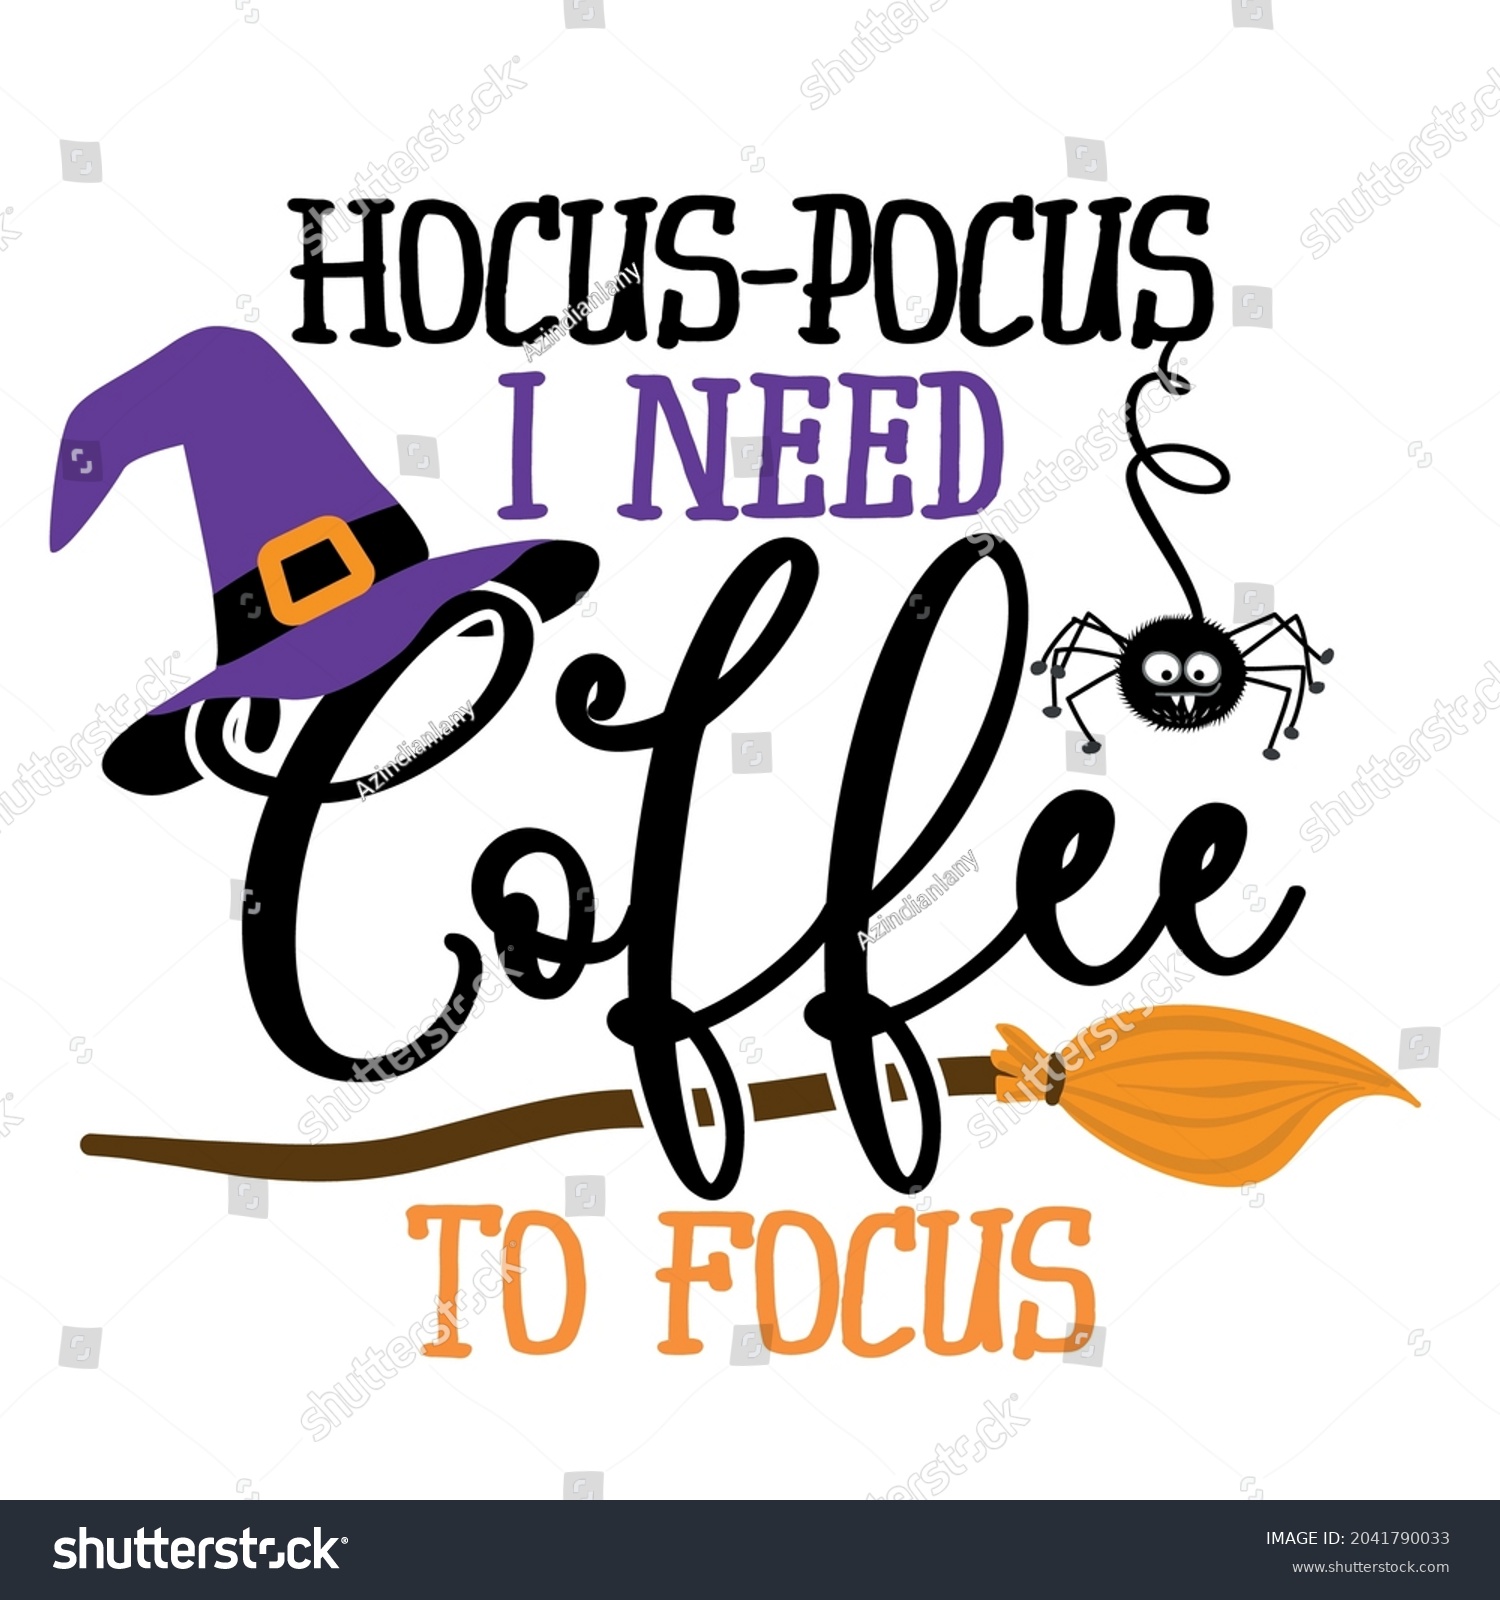 SVG of Hocus focus, I need coffee to focus - Halloween quote on white background with broom and witch hat. Good for t-shirt, mug, scrap booking, gift, printing press. Holiday quotes. Witch's hat, broom. svg